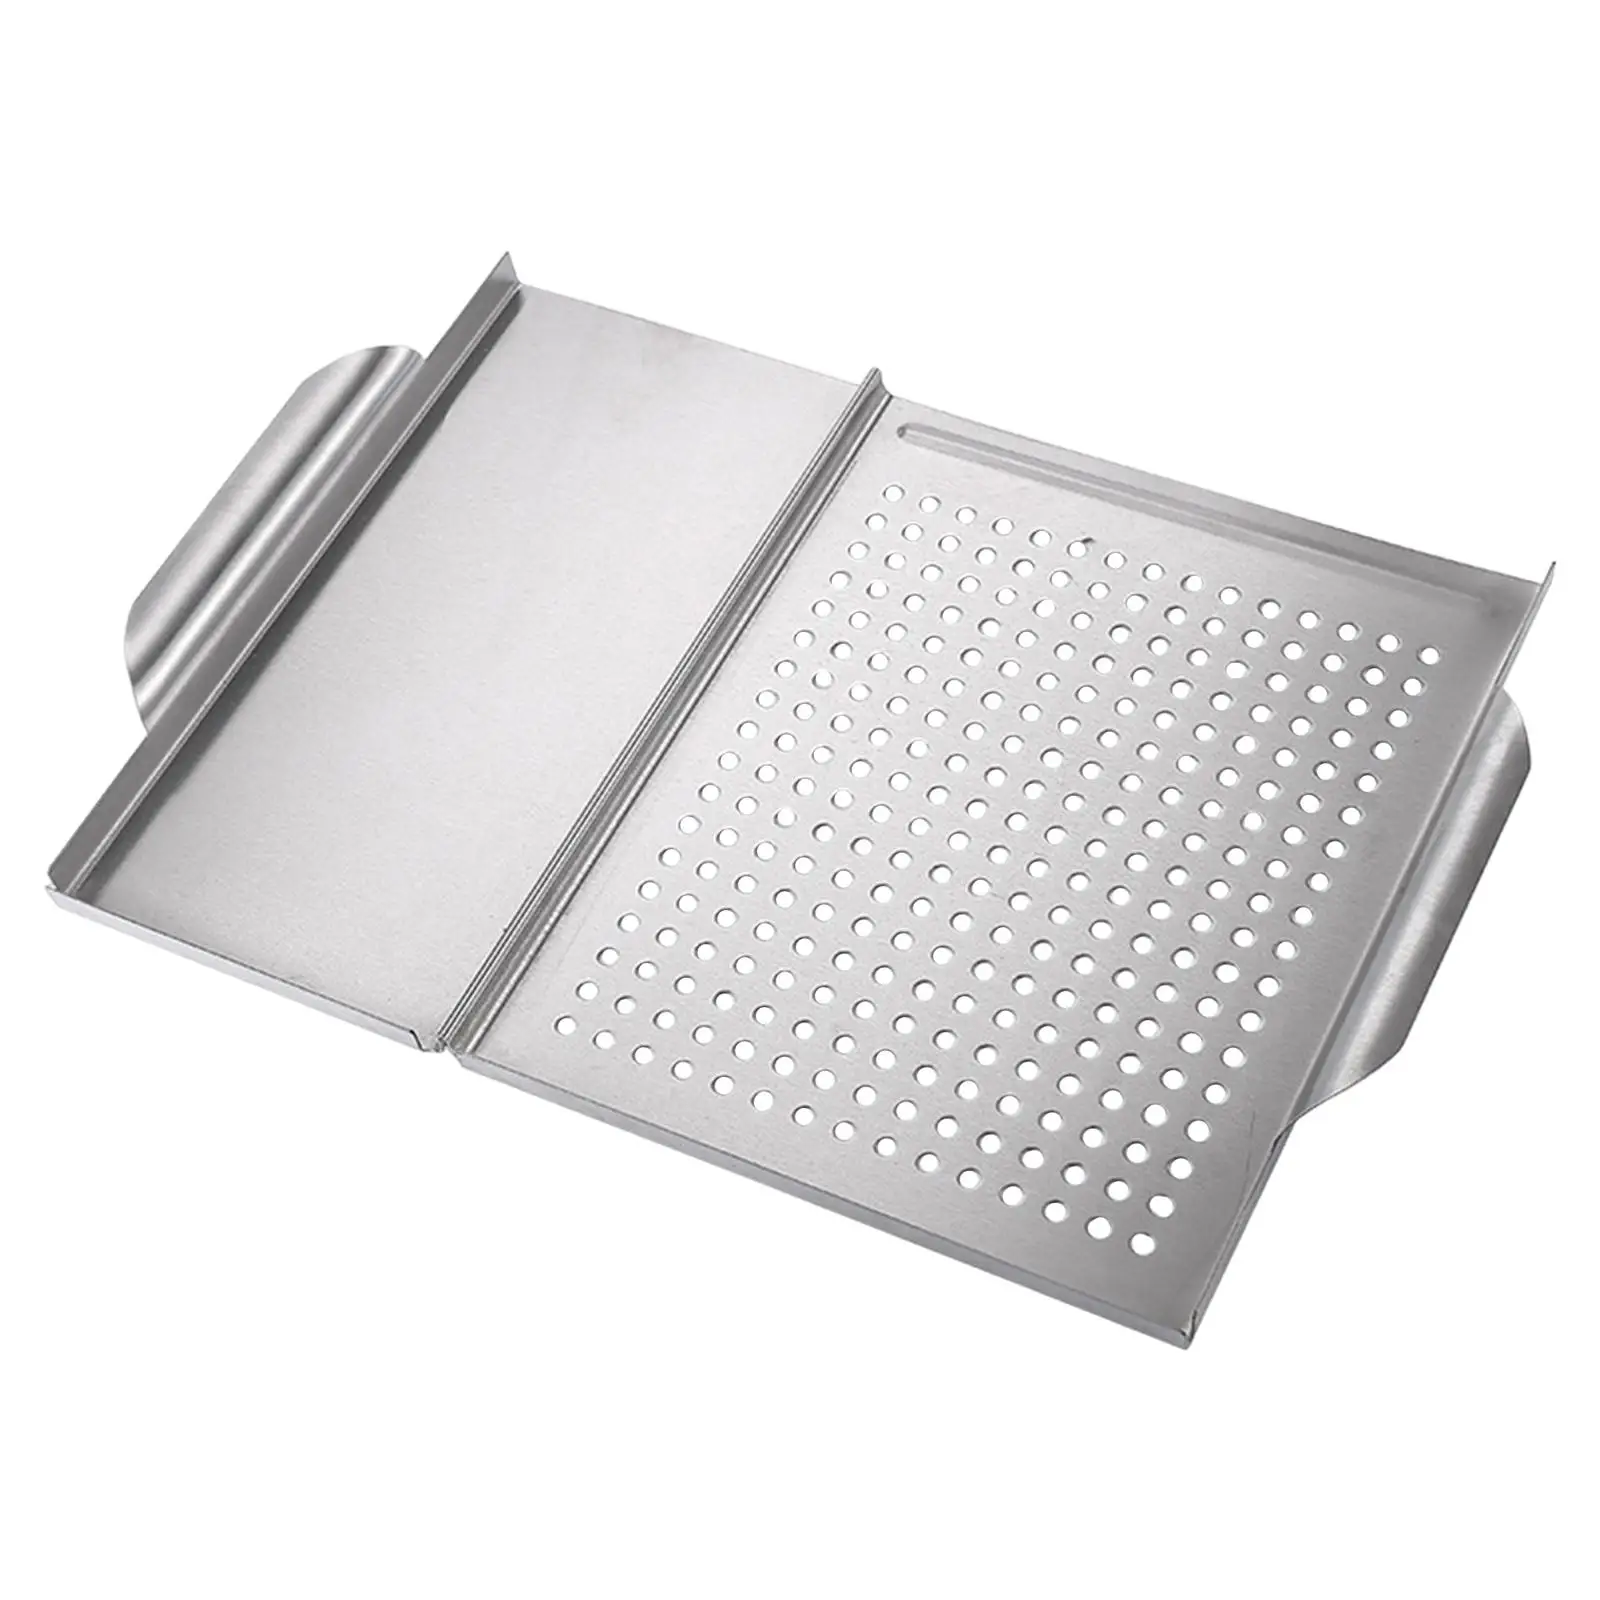 Stainless Steel Grill Topper Grid Nonstick Grill Basket with Holes Grilling Tray